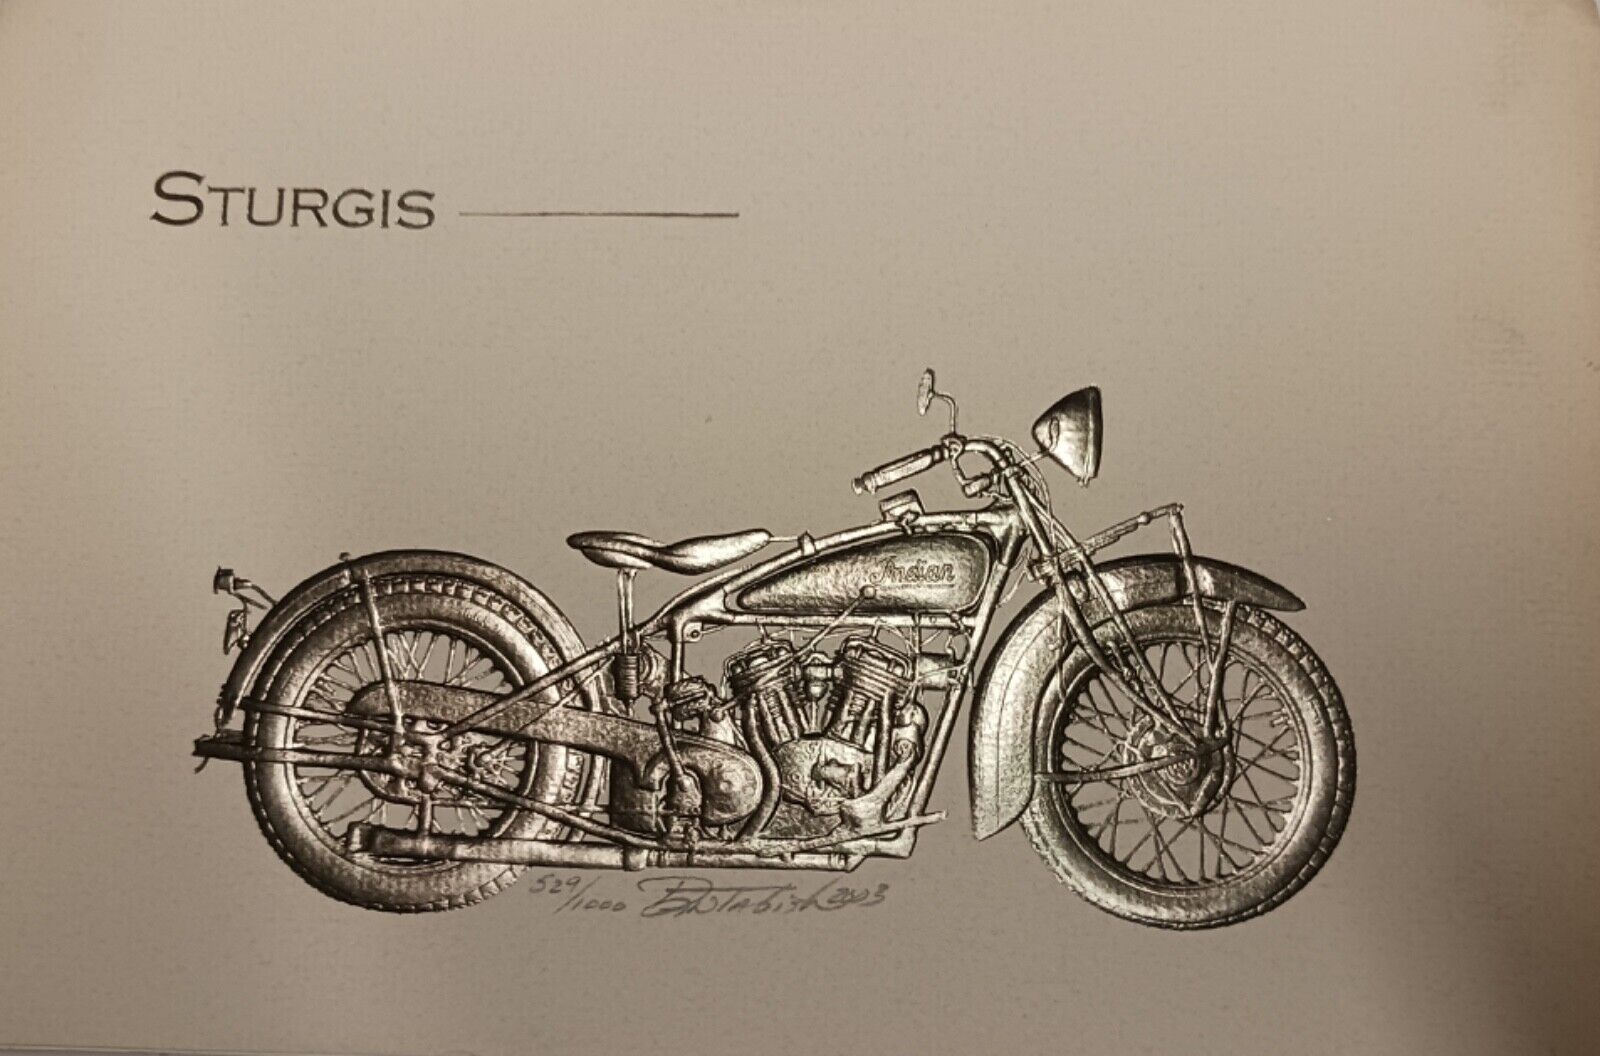 Sturgis 2003-63rd annual Motorcycle rally. Limited edition embossed #529 of 1000